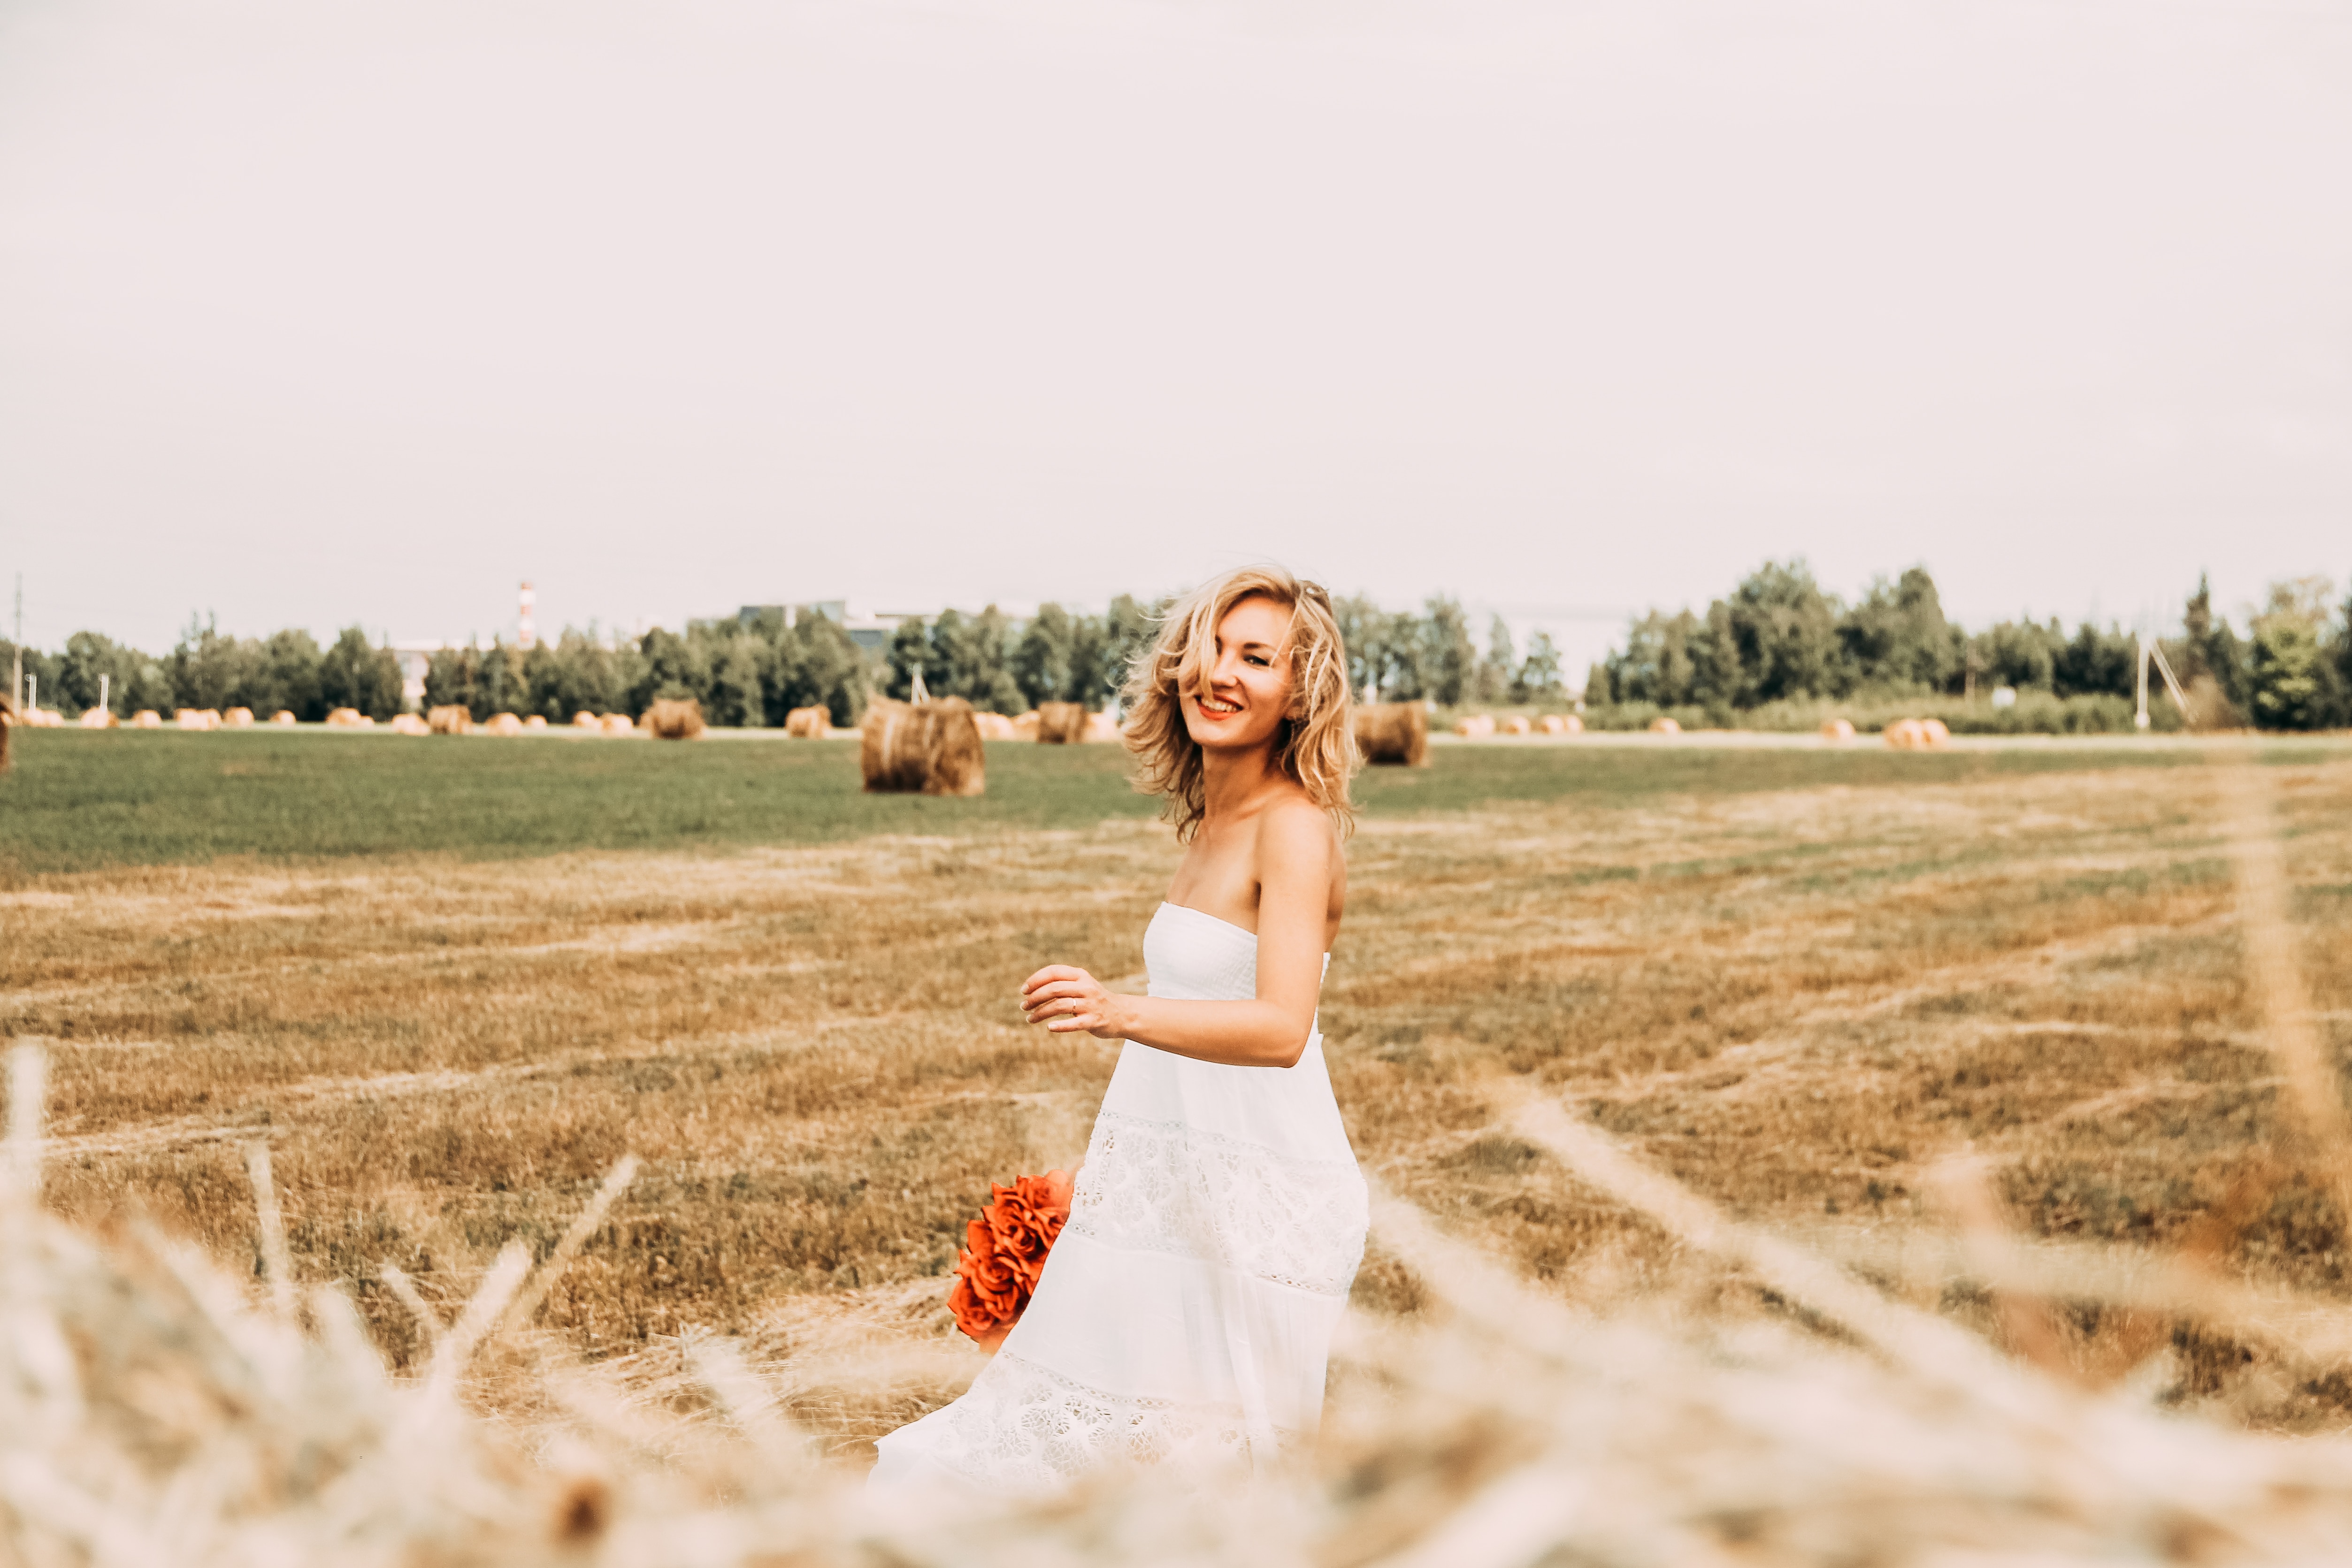 woman in white floral dress standing on grass field during daytime